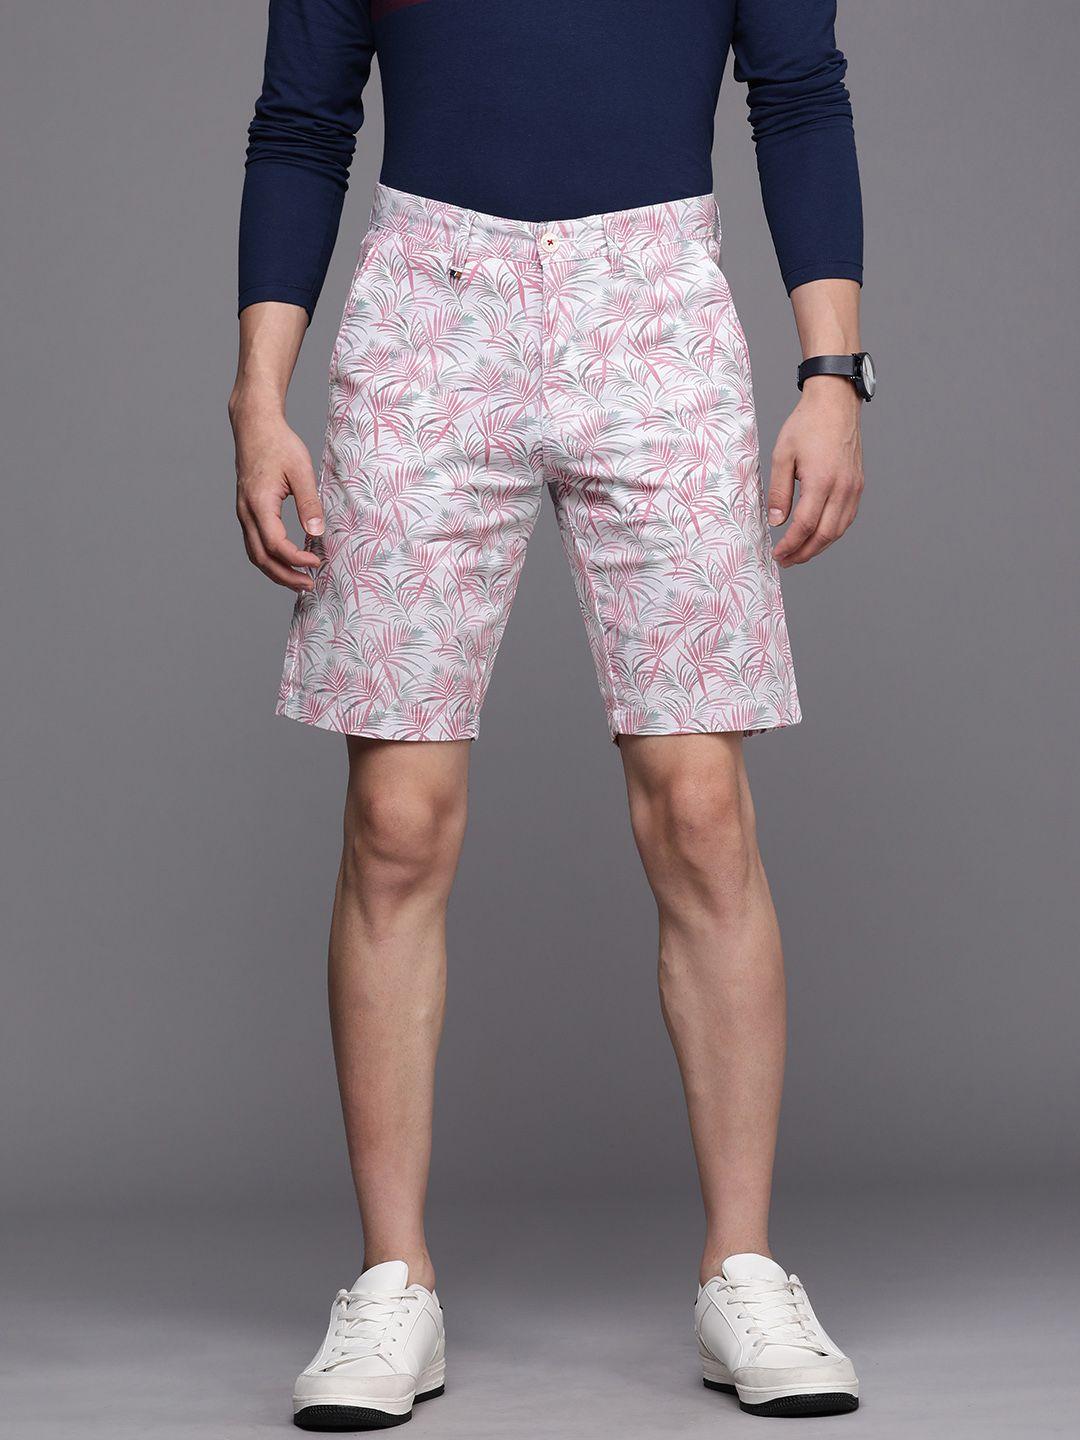 louis-philippe-sport-men-white-&-pink-tropical-printed-slim-fit-shorts